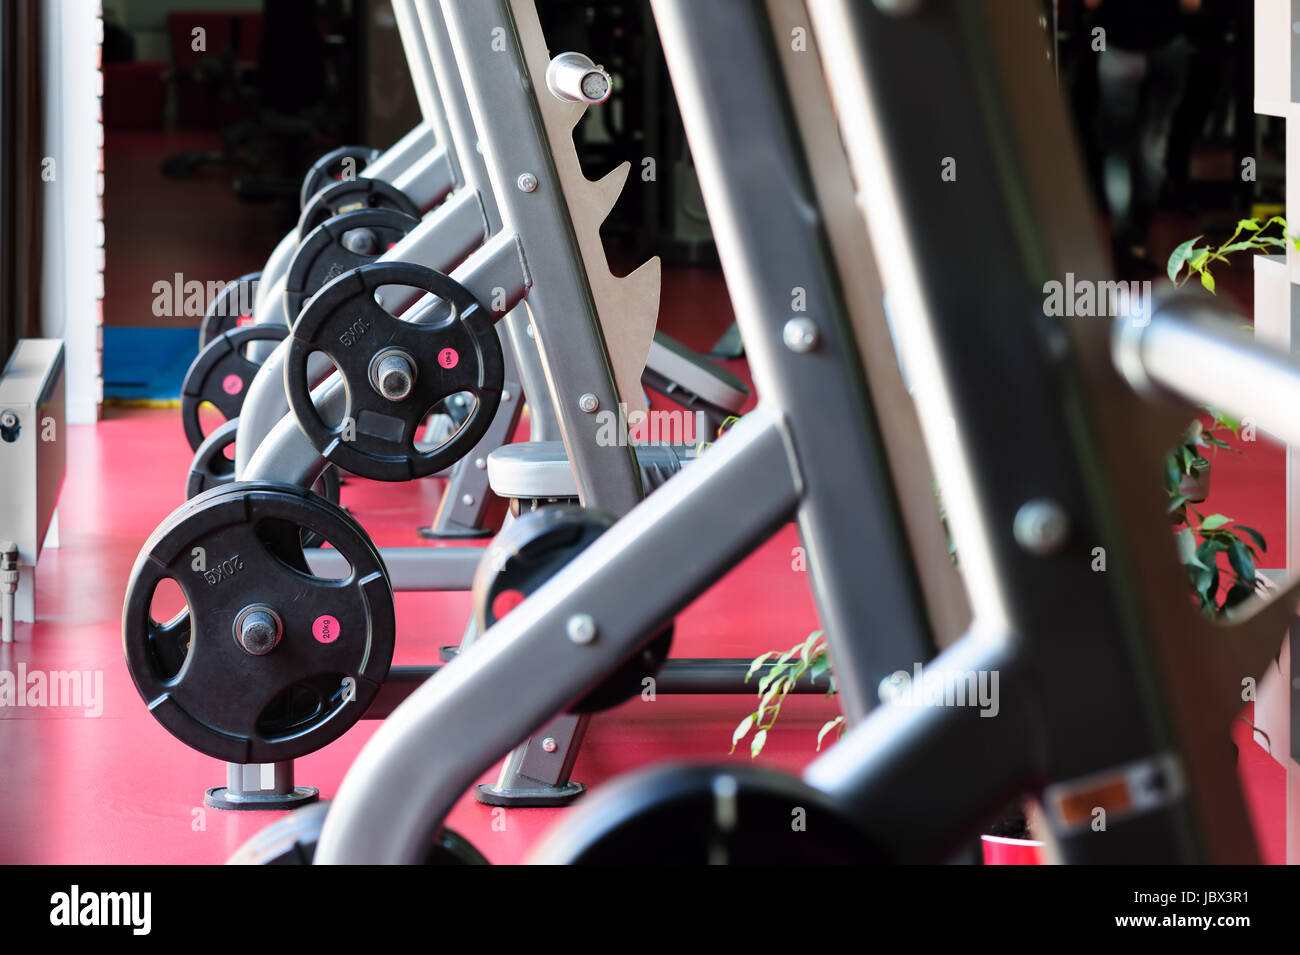 Barbell bench press stands ready to use Stock Photo